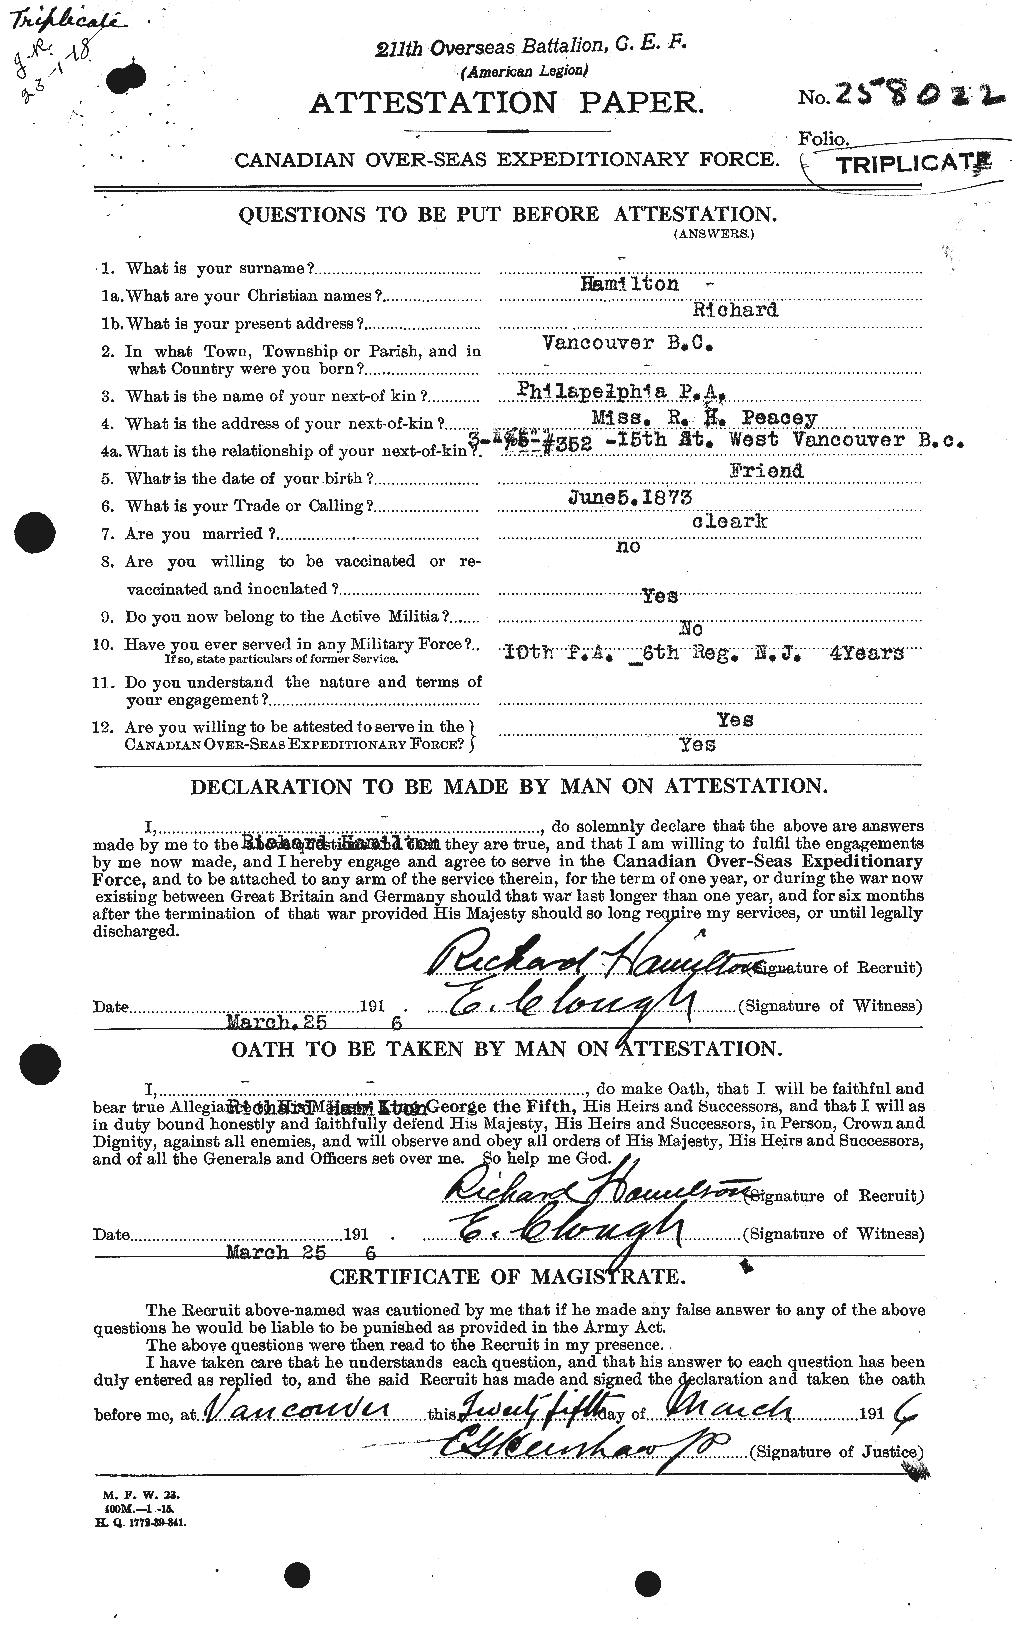 Personnel Records of the First World War - CEF 373216a